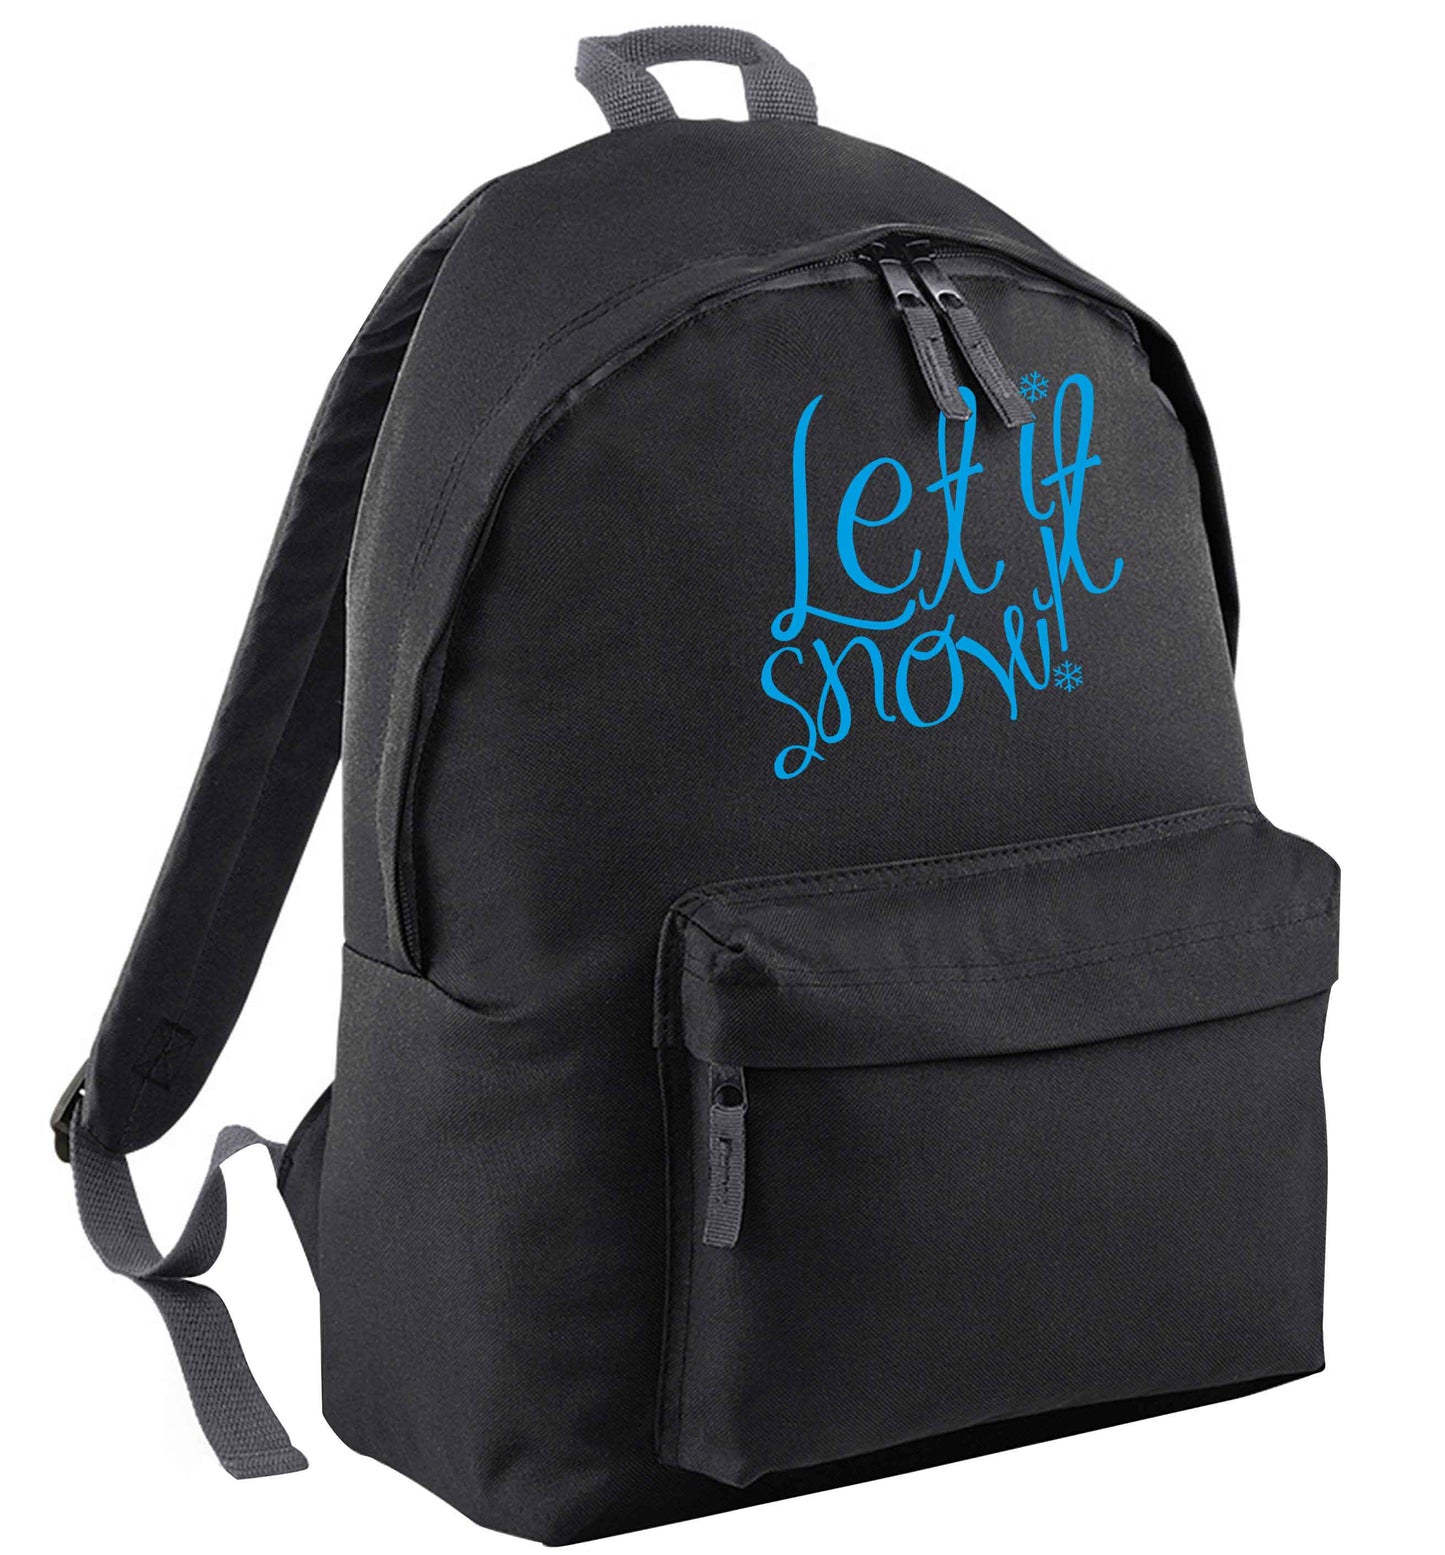 Let it snow black adults backpack